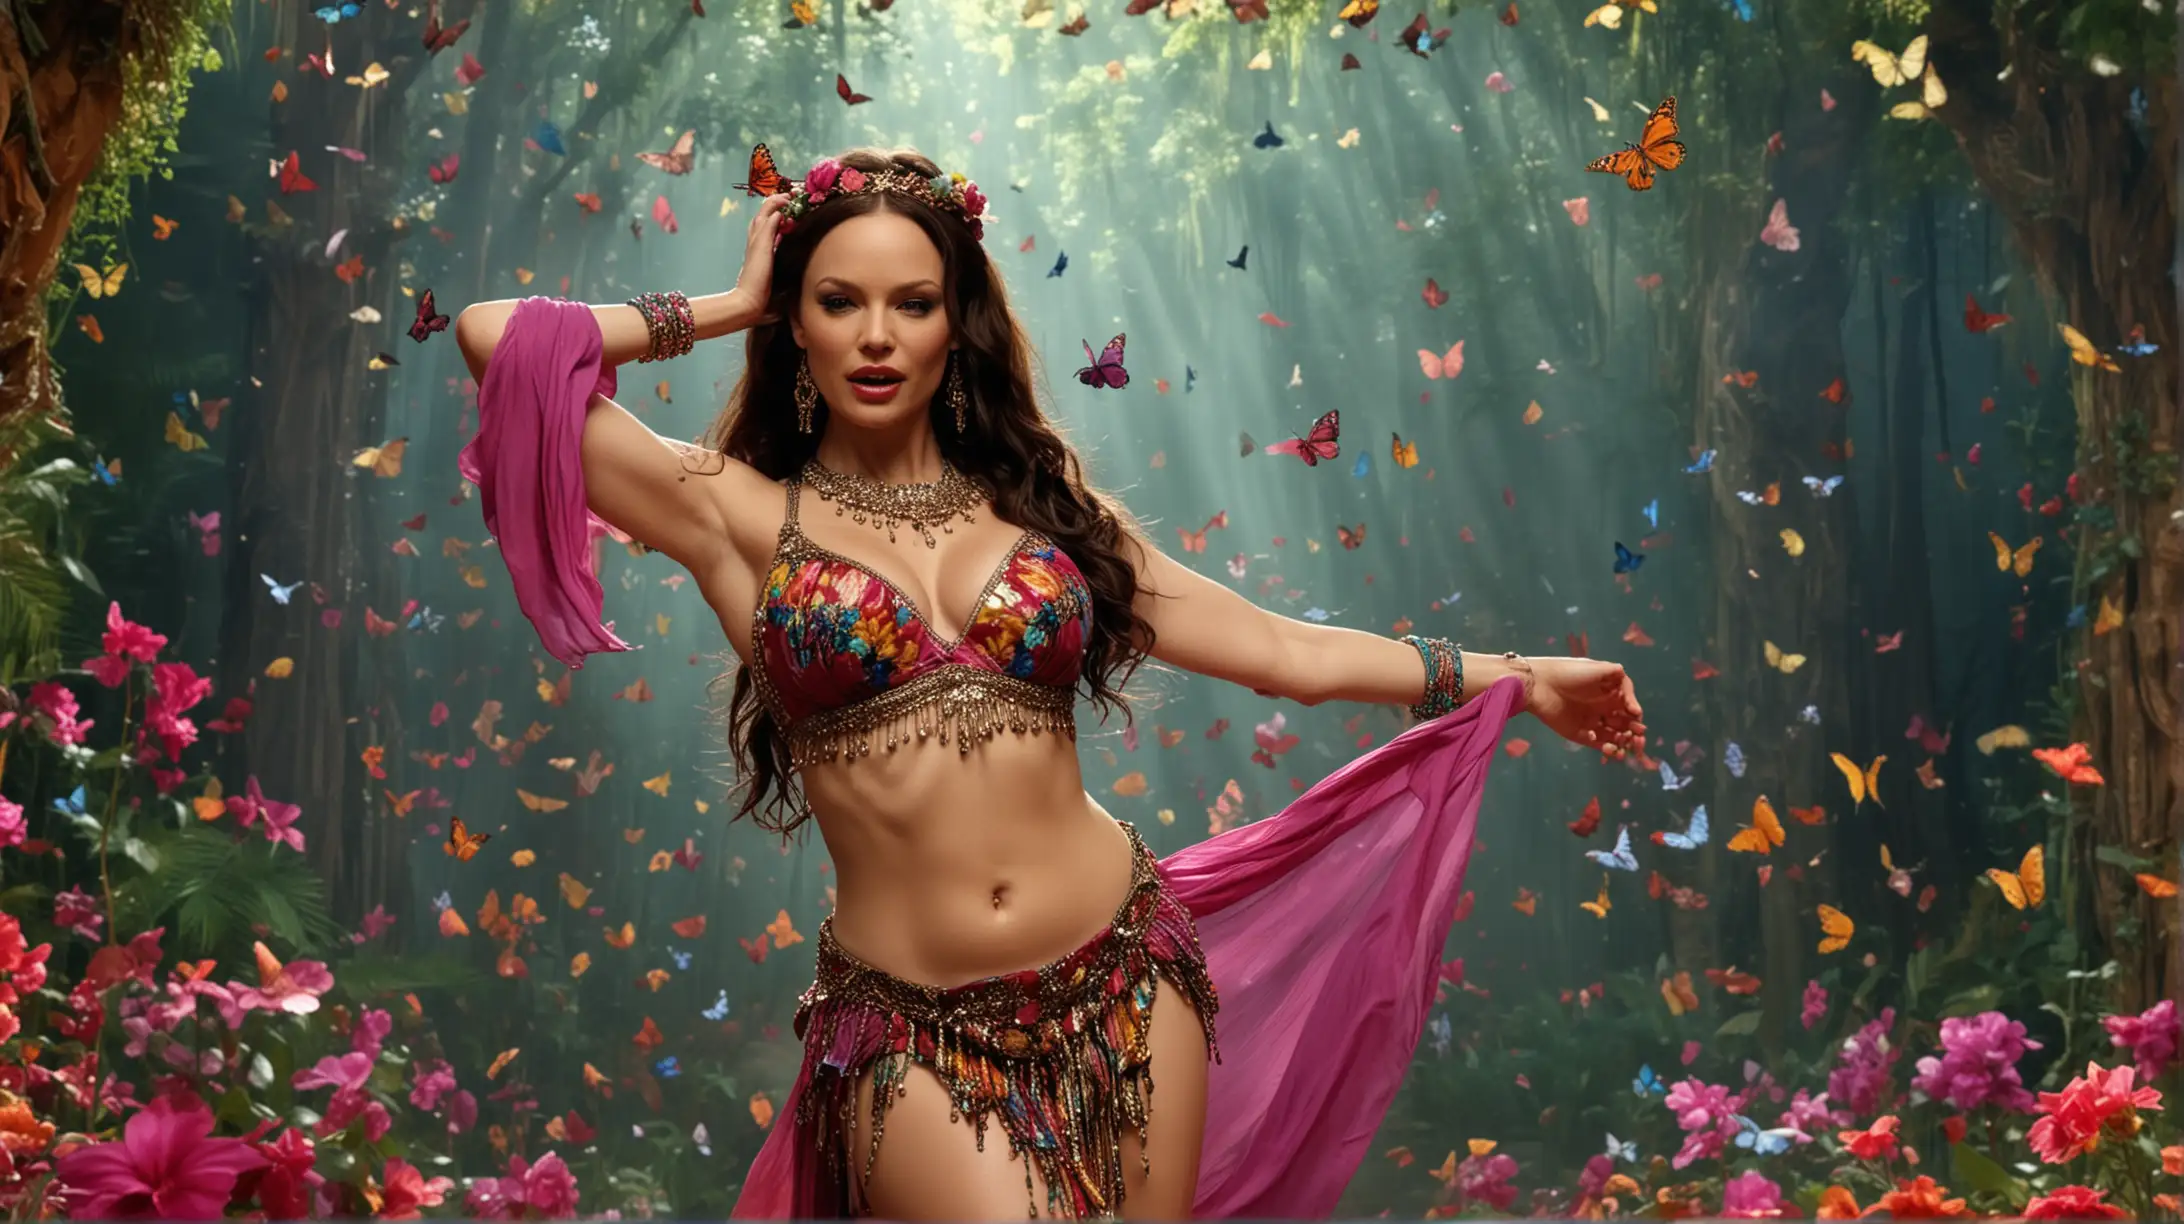 Rebecca Ferguson as Seductive Belly Dancer Performing Exotic Dance, marneta clothers, very big boobs, surrounded by gorgeous colorful flowers, butterflies, fantasy forest